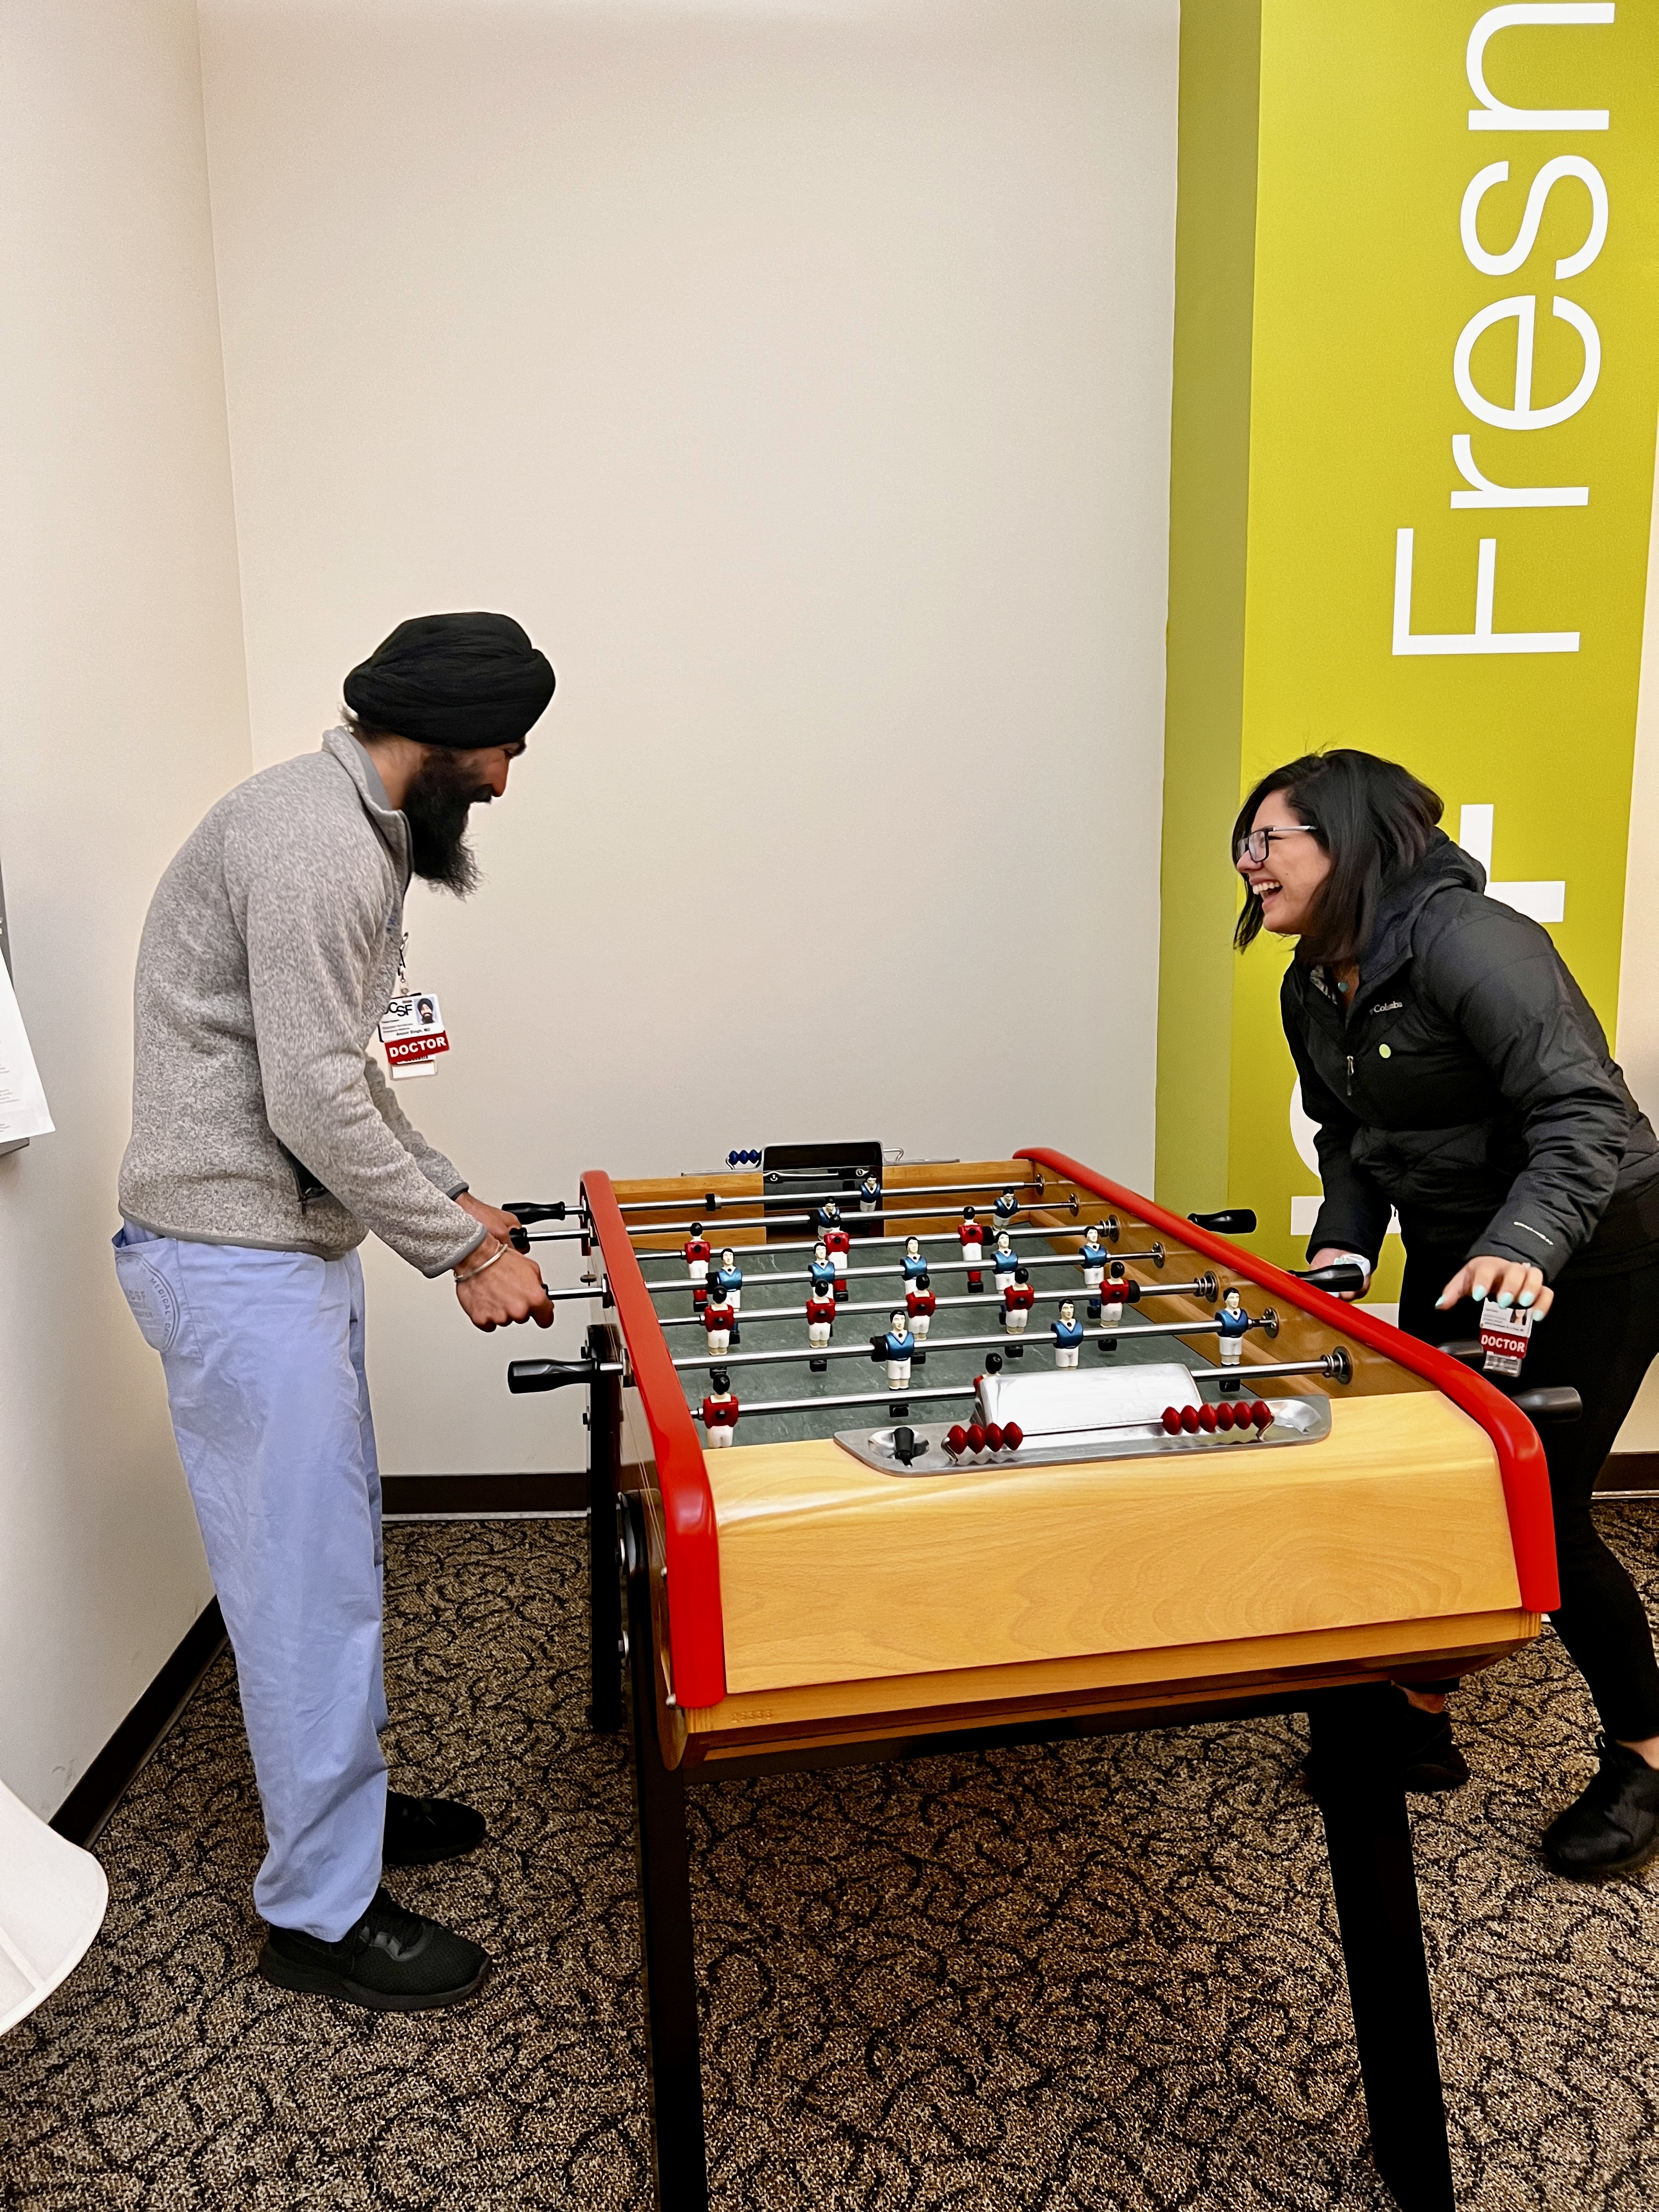 Students playing foosball in redesigned lounge room.